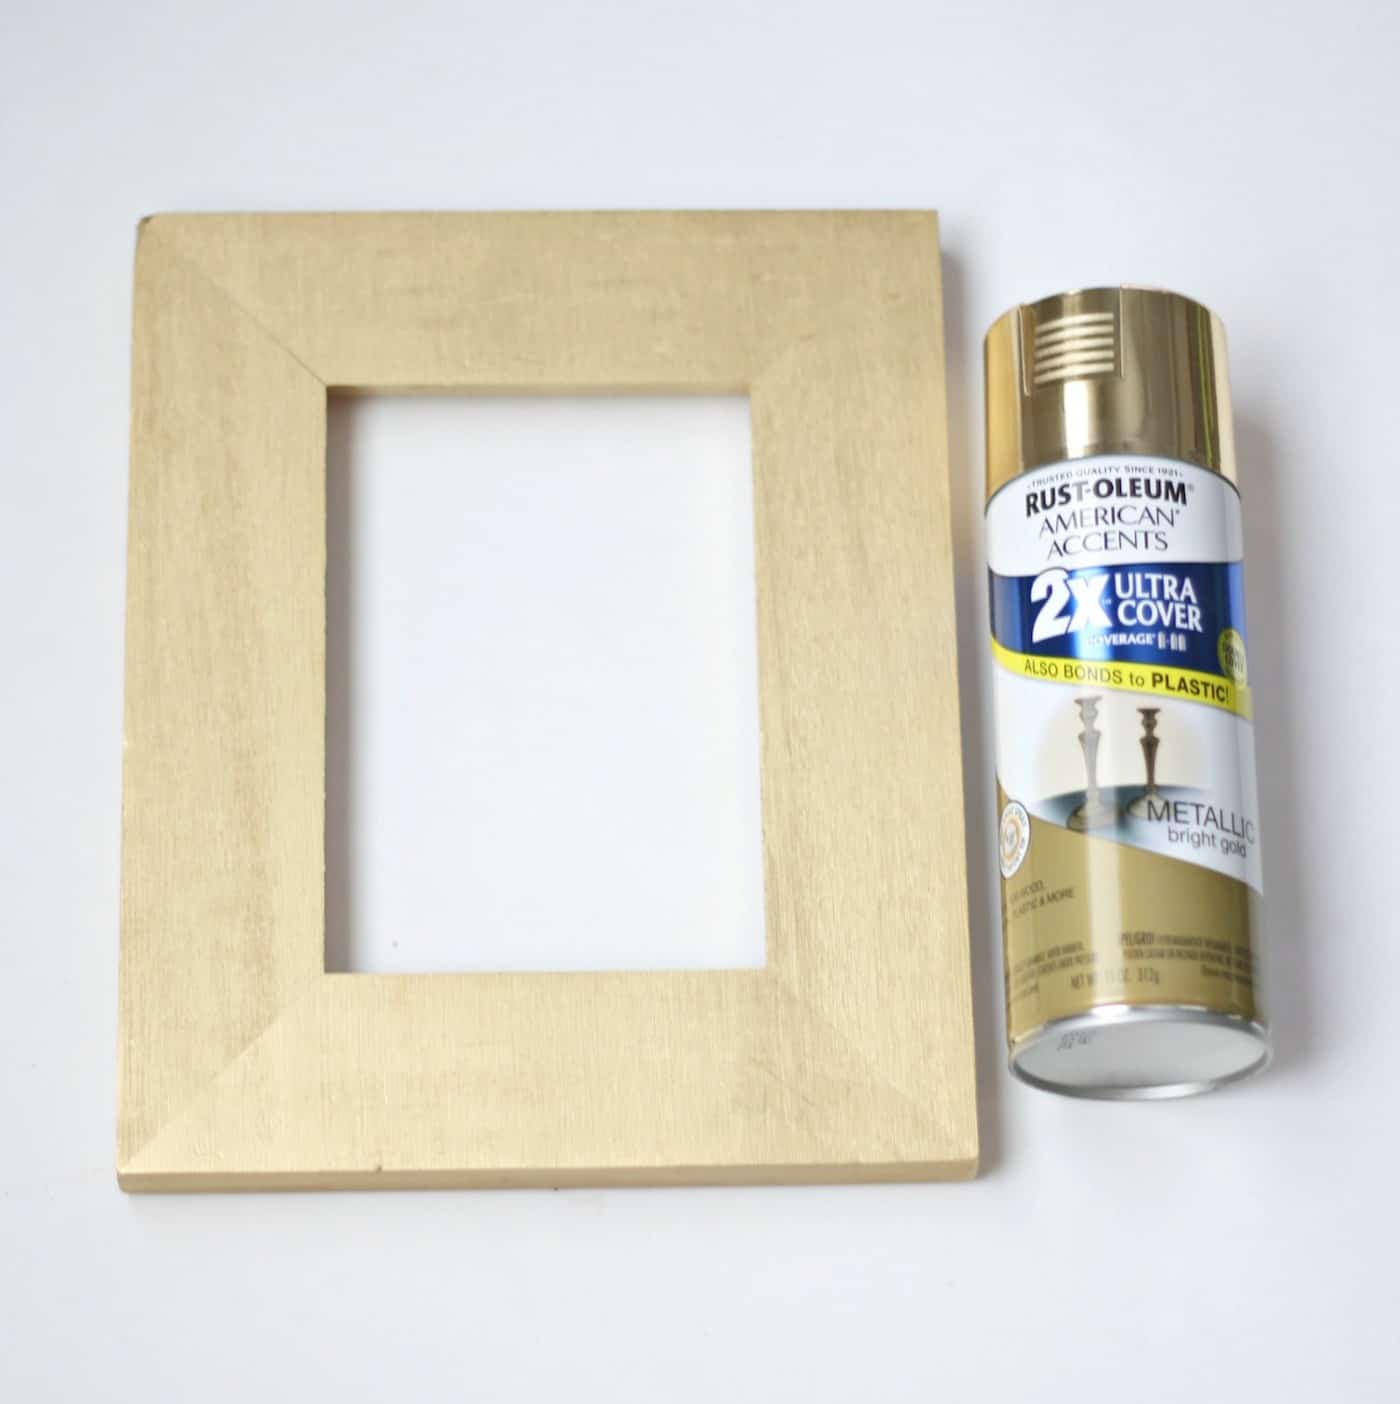 Rectangular wood frame and a gold can of spray paint